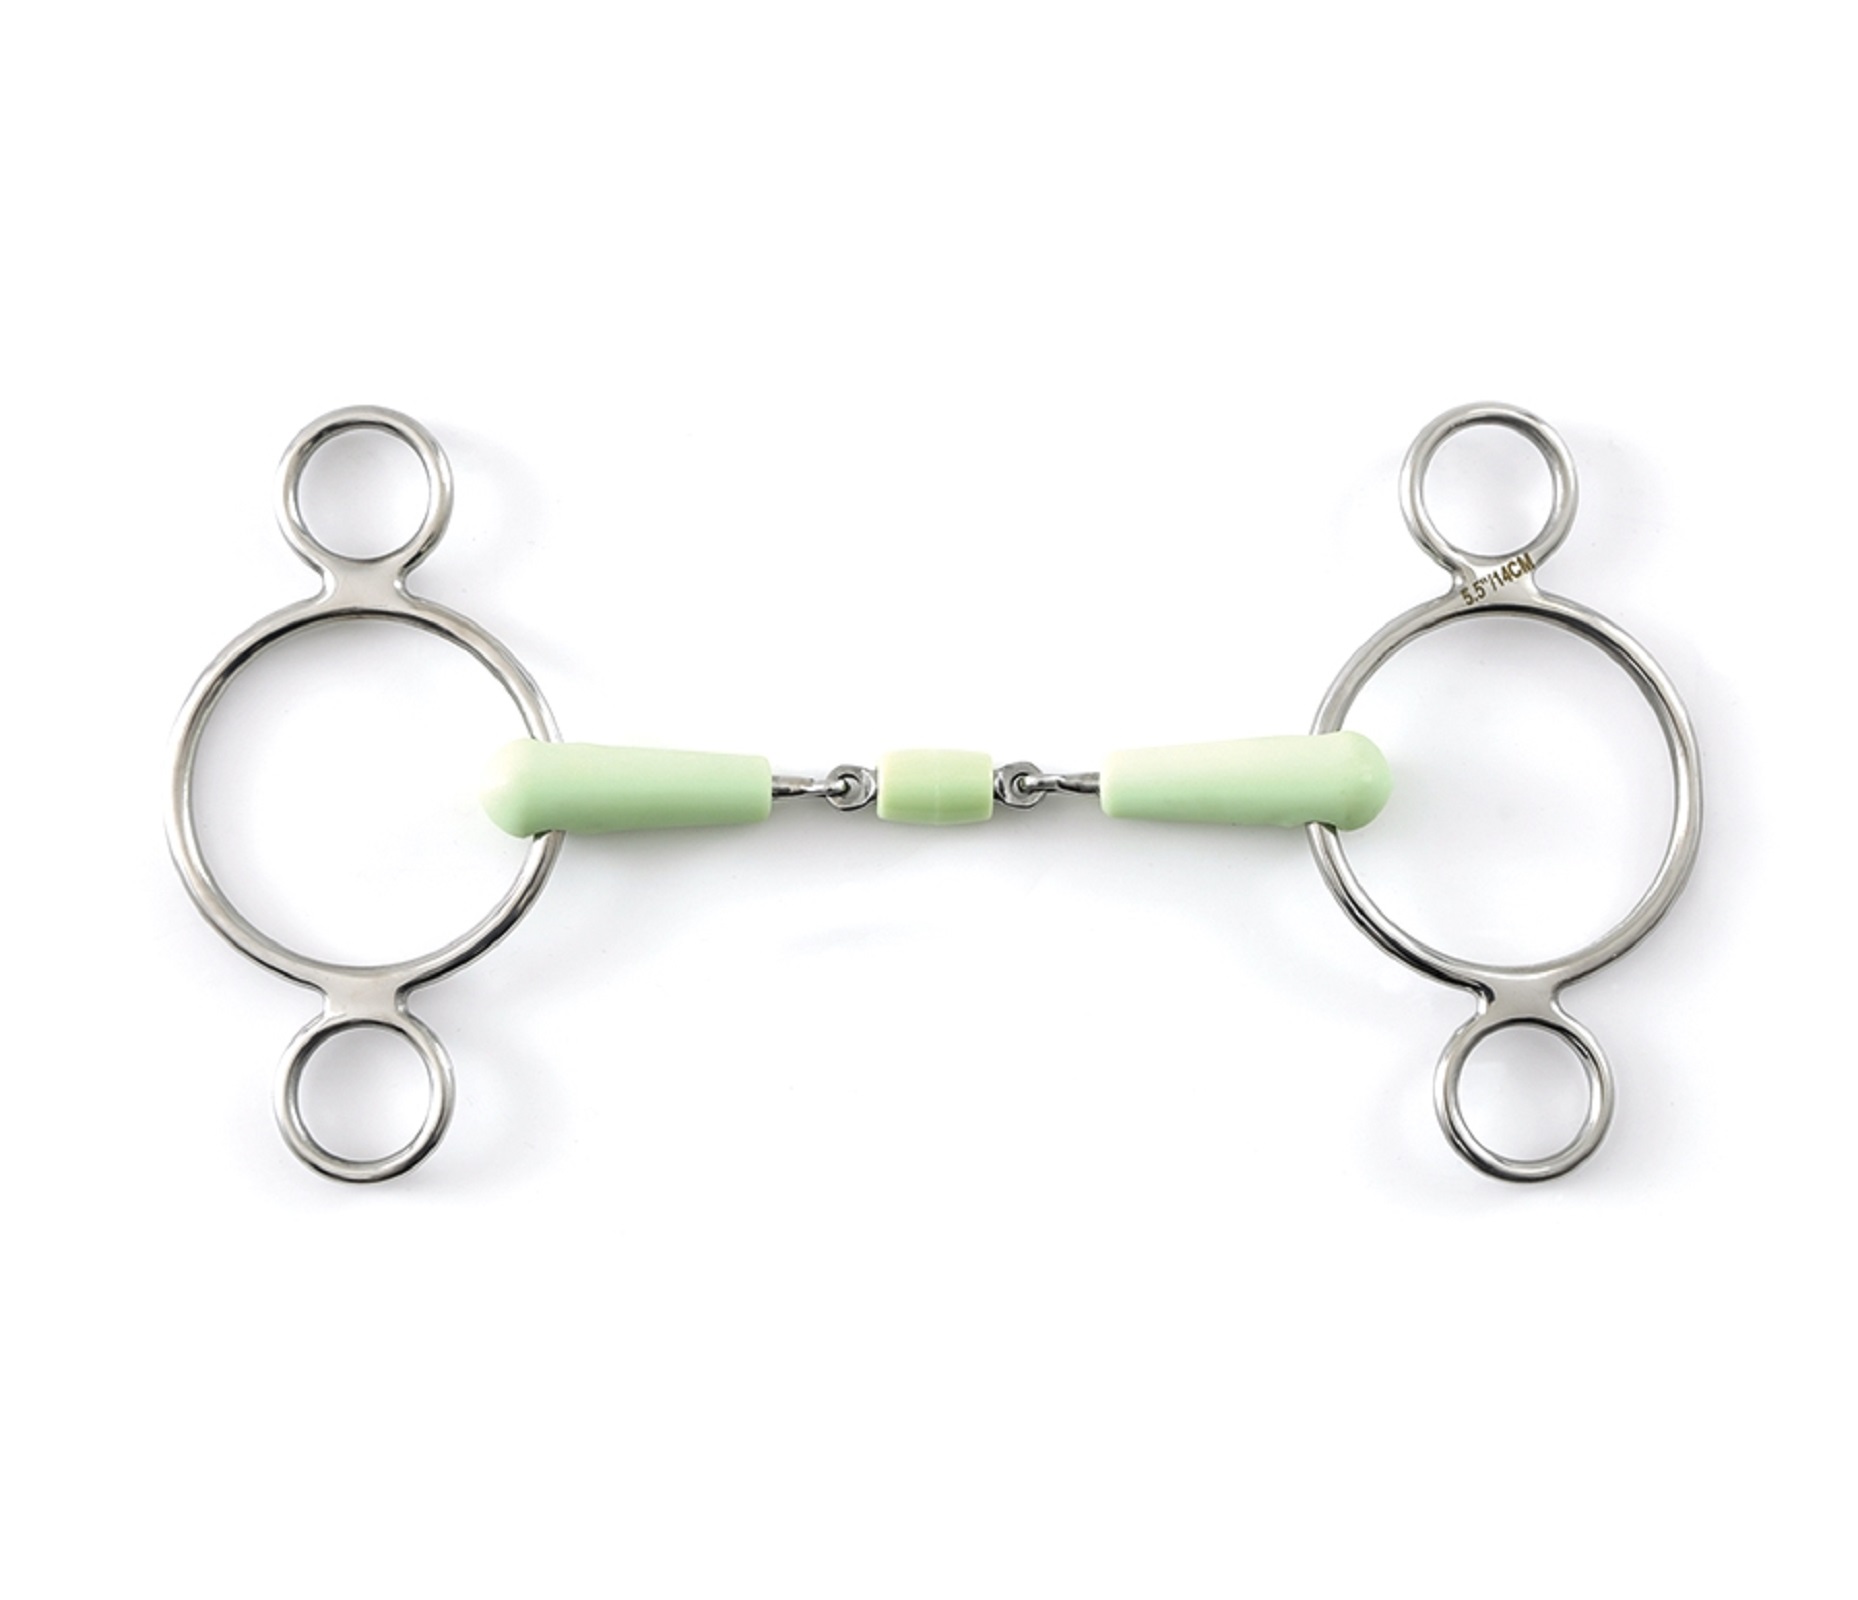 Shires Equikind Two Ring Gag With Peanut 5/" or 5.5/" 4.5/"